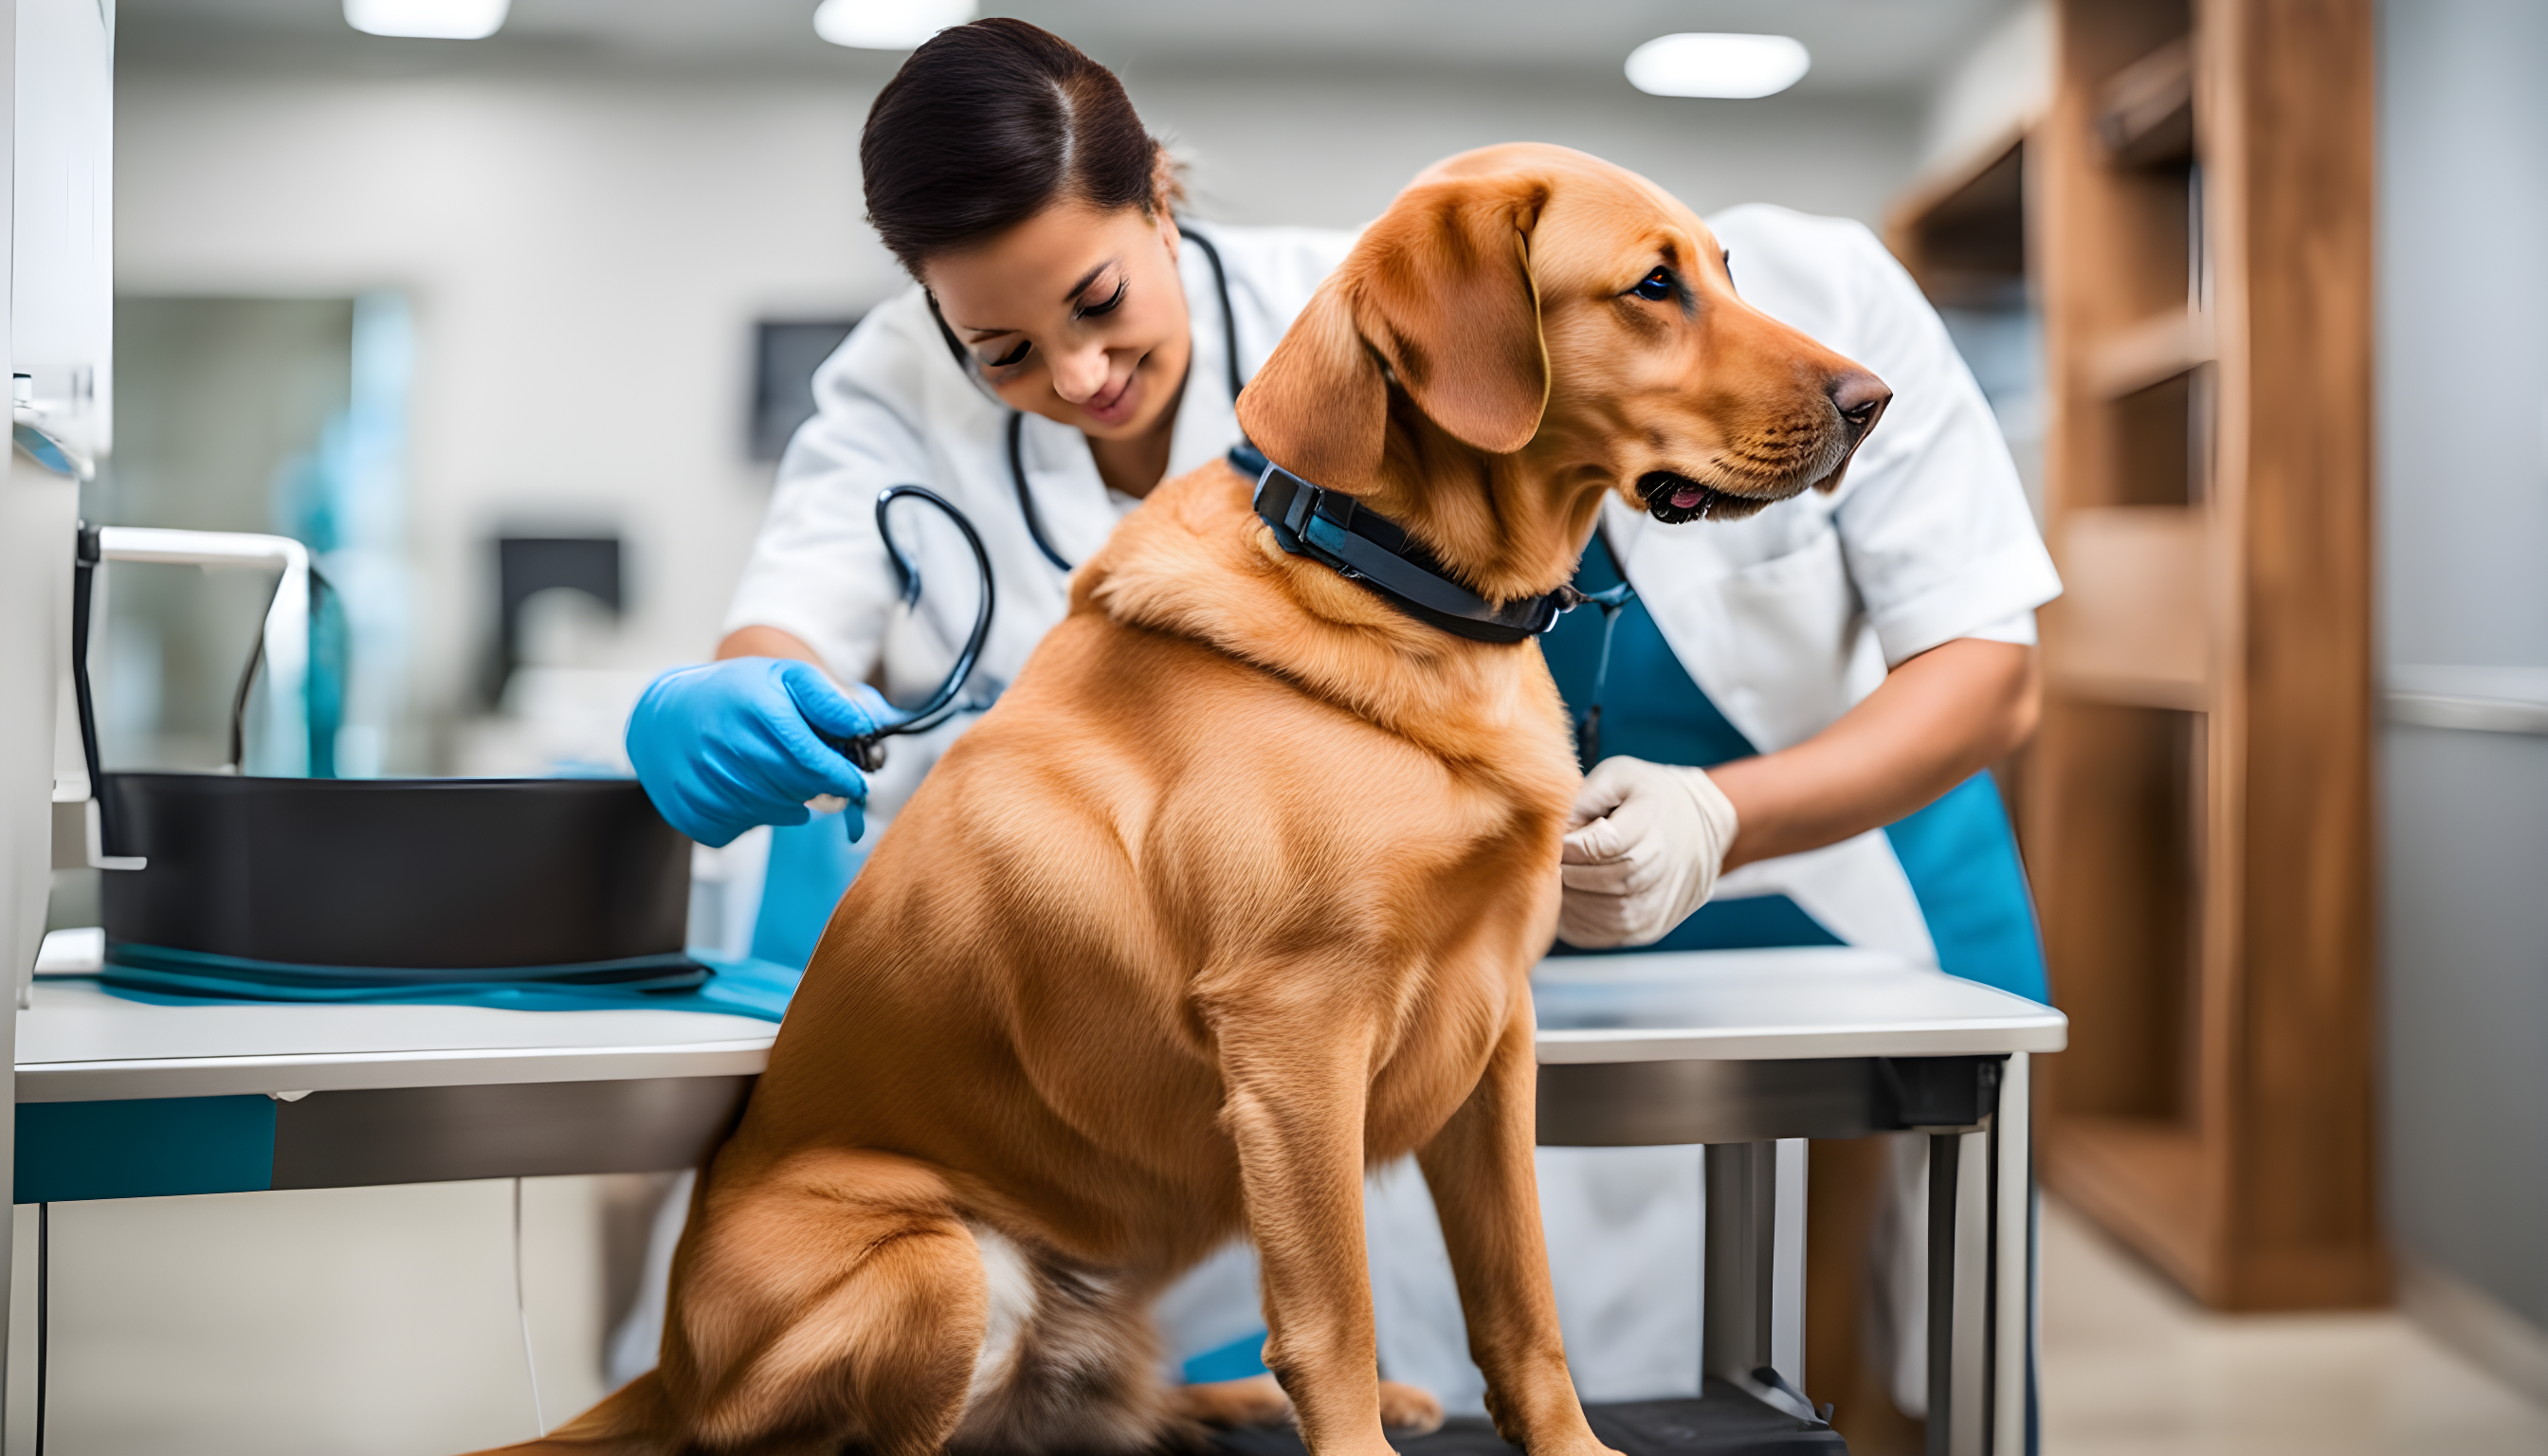 Red Fox Labrador dog getting its yearly check-up like a responsible adult